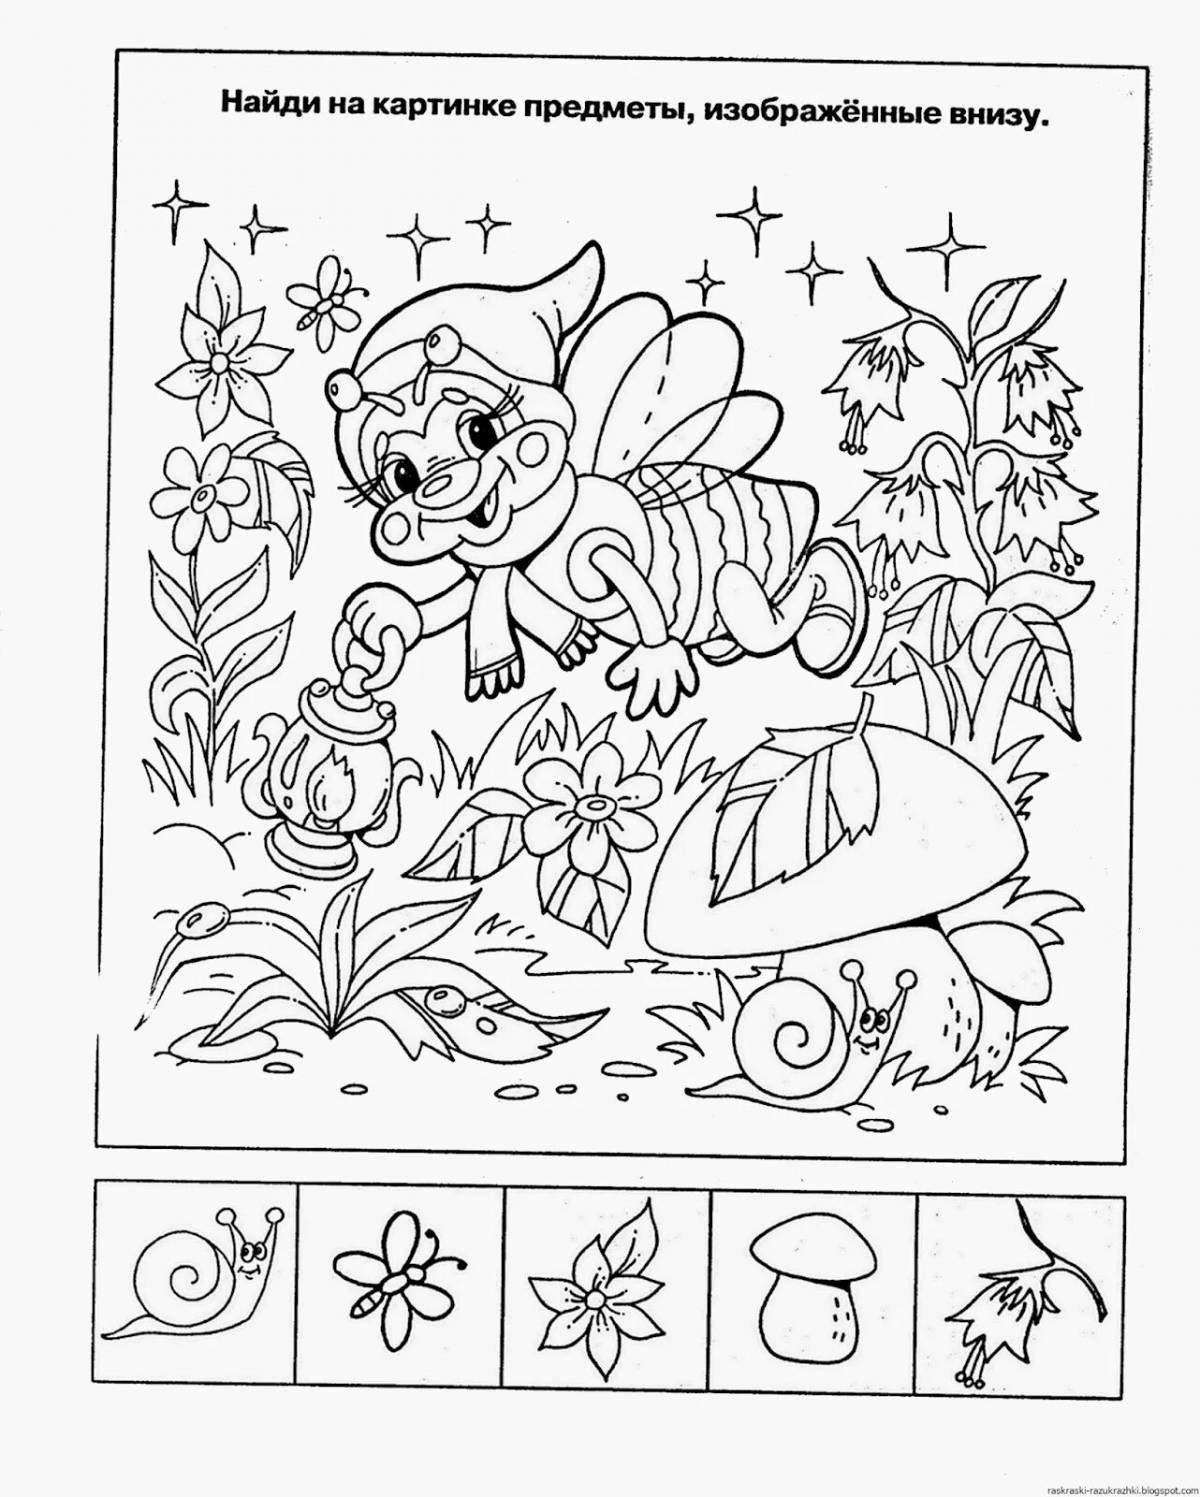 A fun coloring book for kids aged 6-10